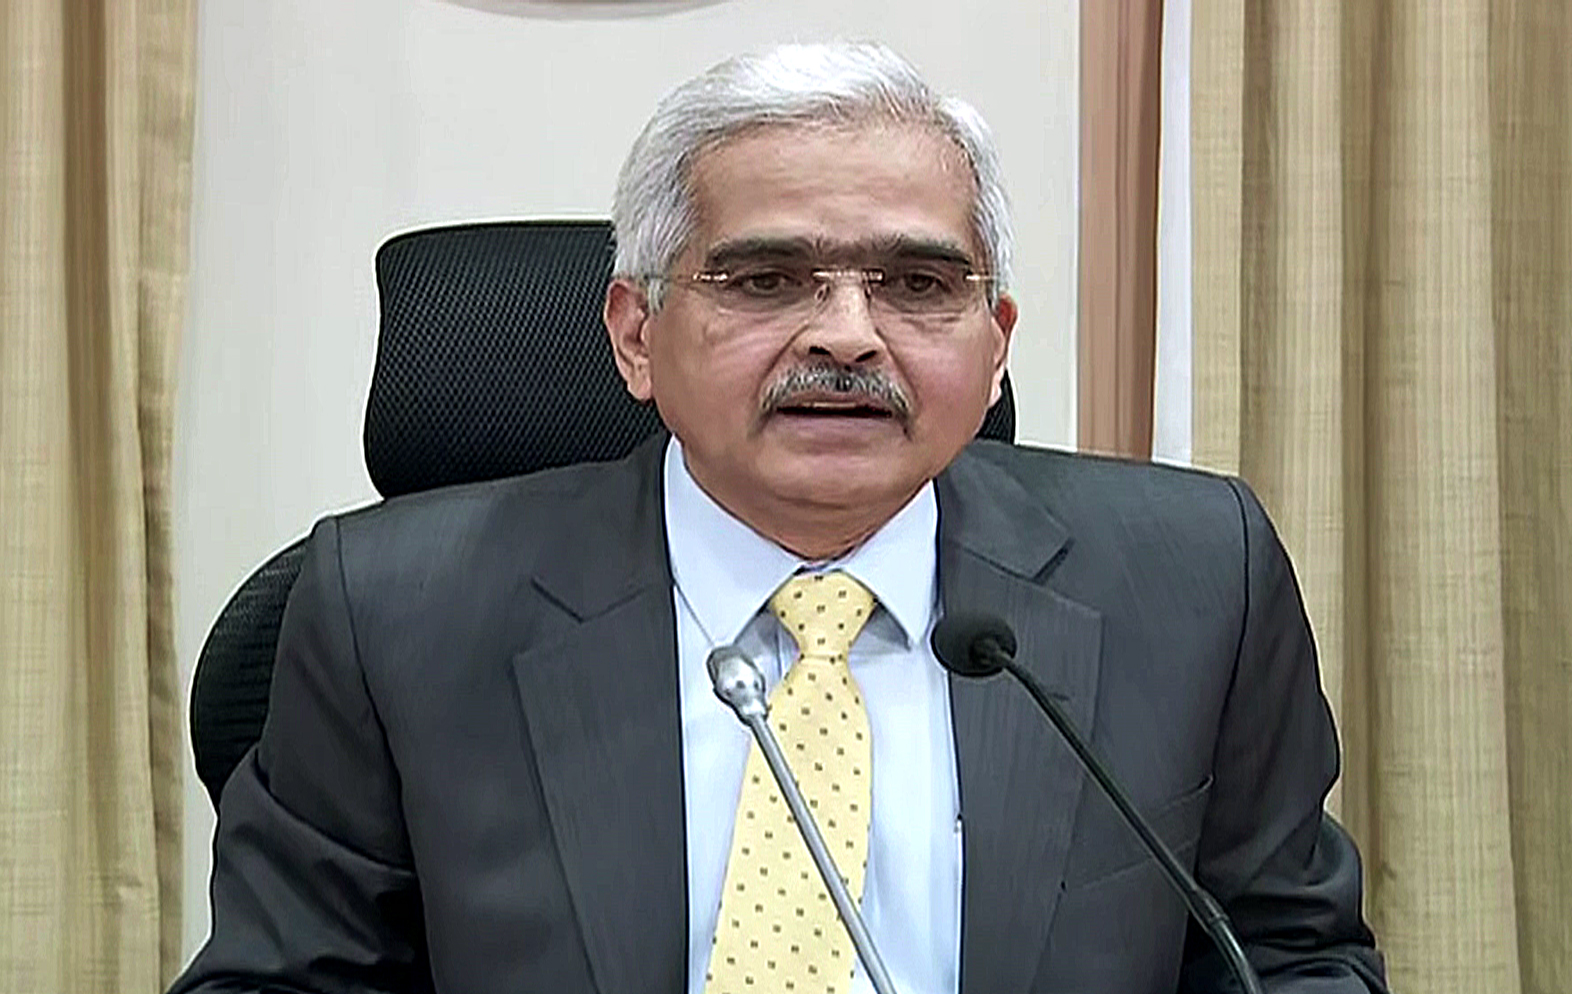 Corporates need to invest more in healthcare sector, says Shaktikanta Das.